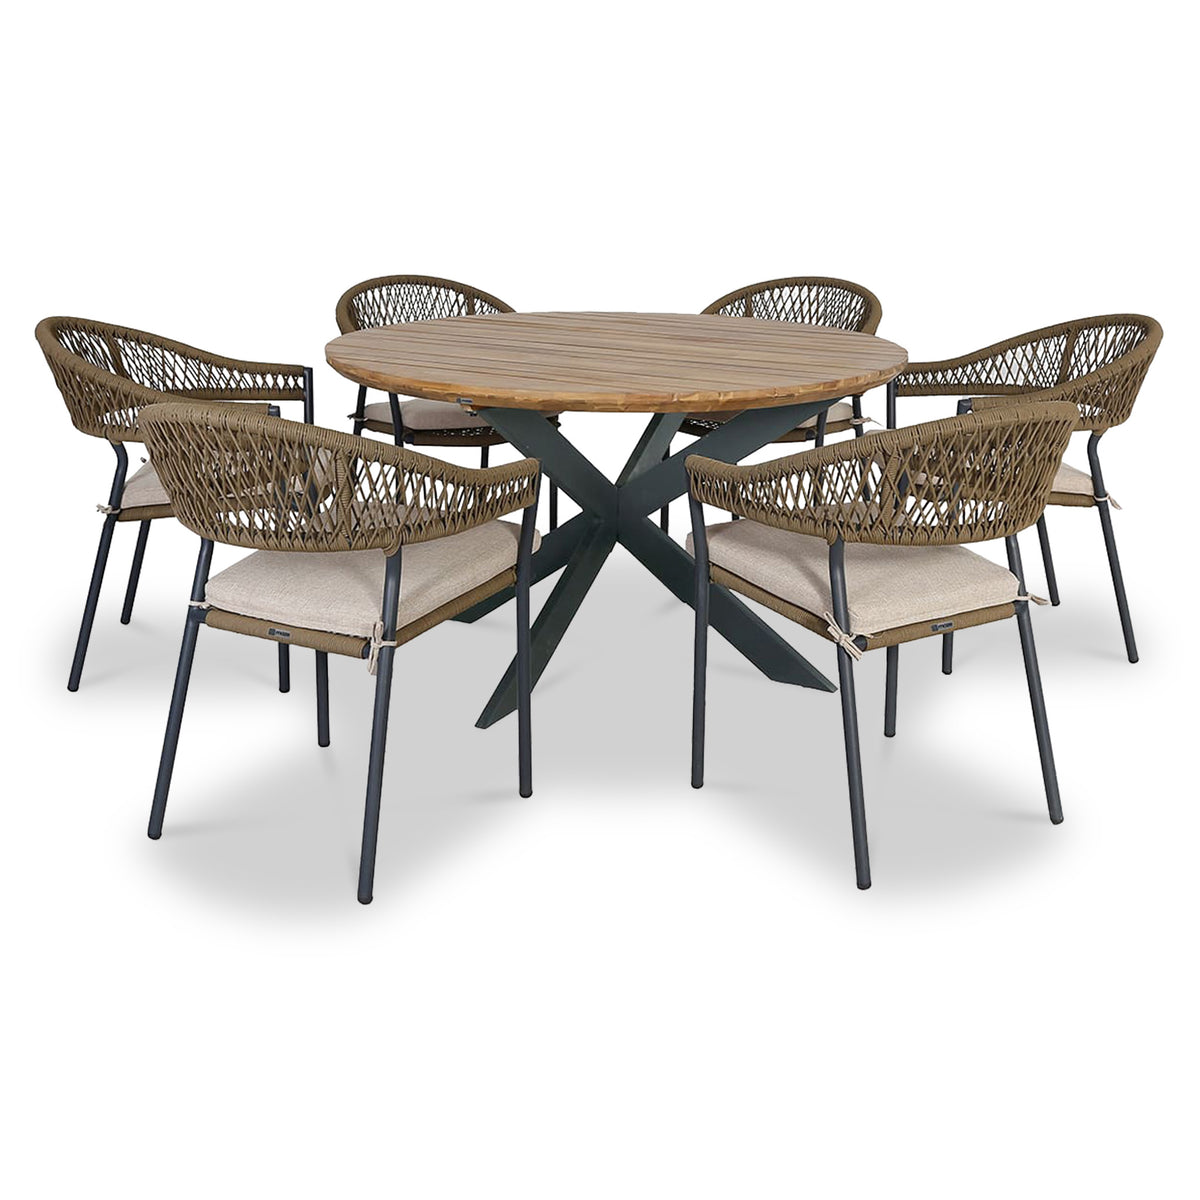 Maze Bali 140cm 6 Seat Round Outdoor Dining Set from Roseland Furniture